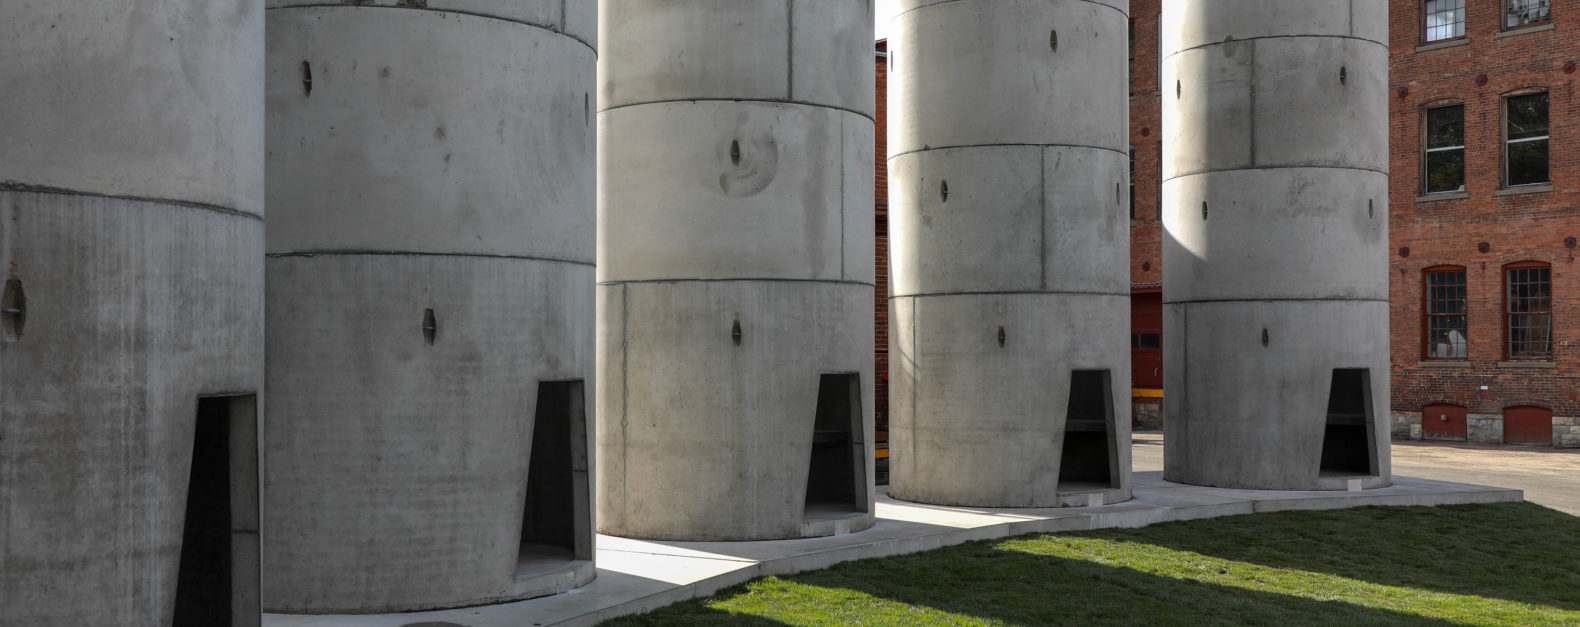 Taryn Simon: The Pipes feature image, large cement towers with doors to enter arranged in semi-circle